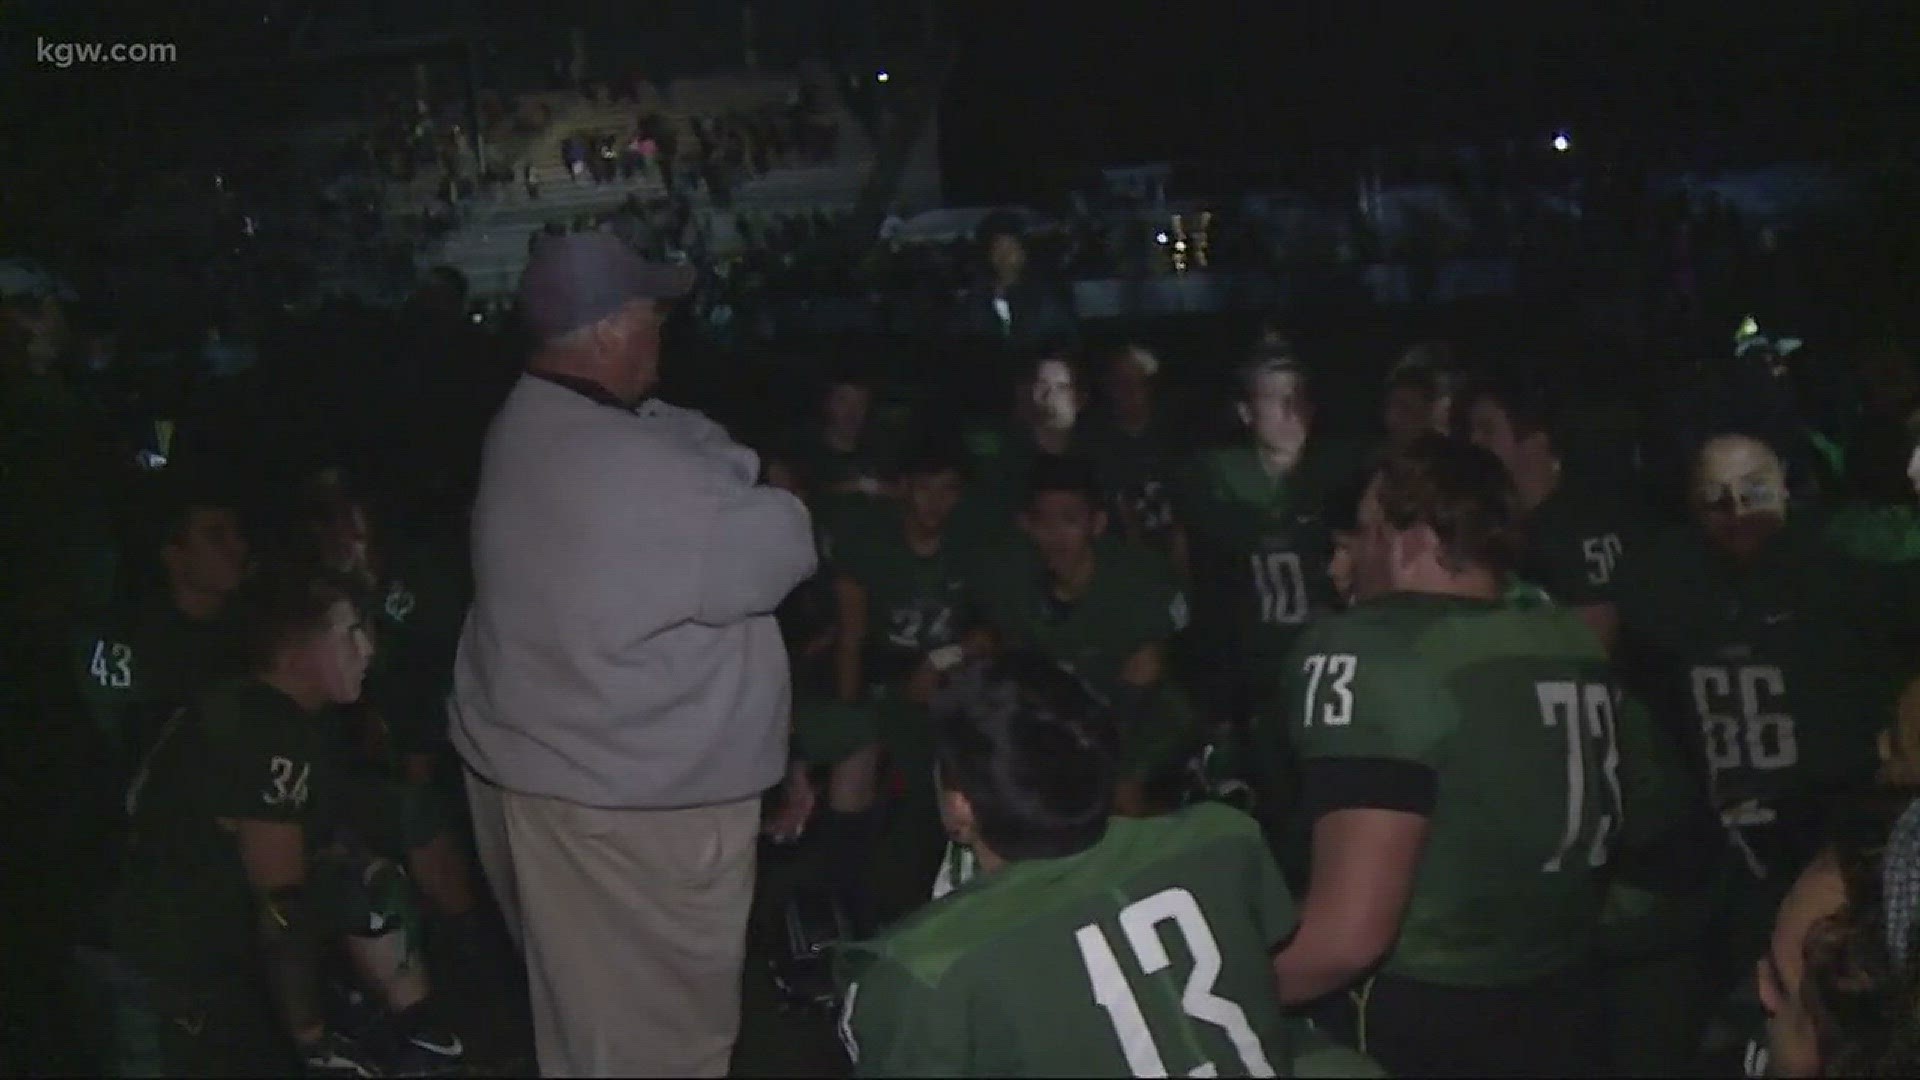 Power outage halts high school football game